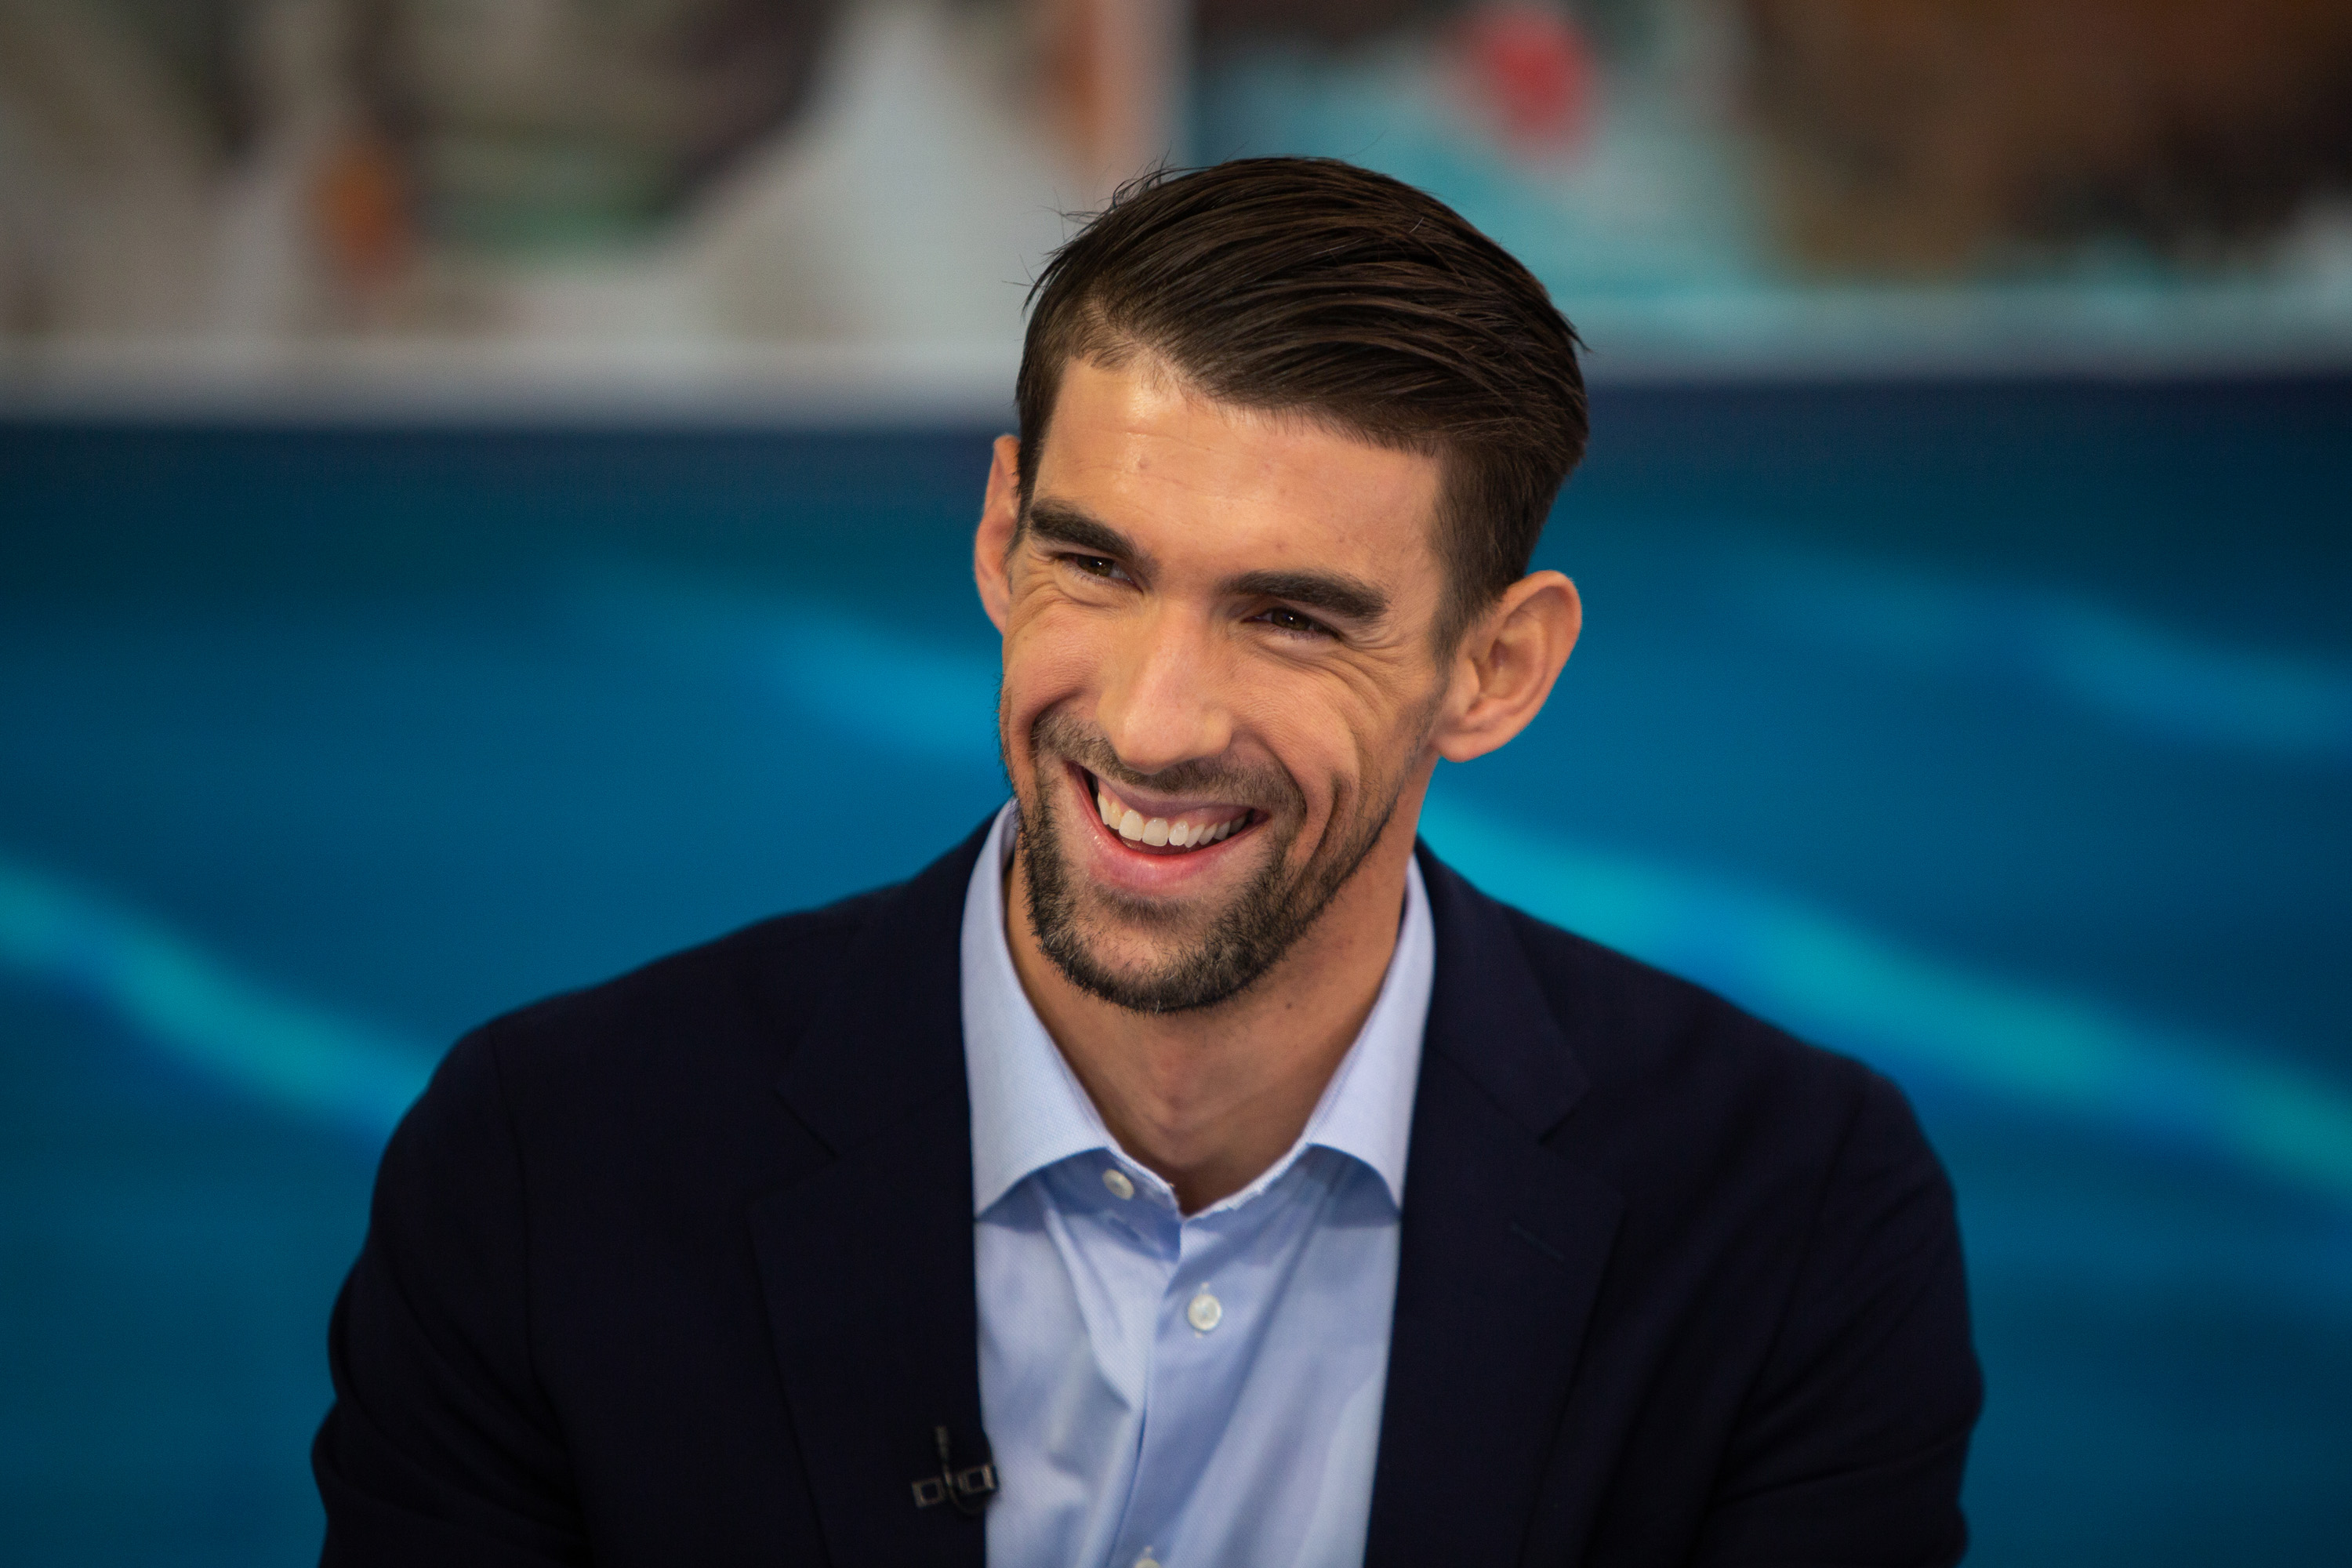 Michael Phelps Treats His Body ‘Like It’s a High-Performance Race Car’ After Gaining 35 Pounds in Retirement